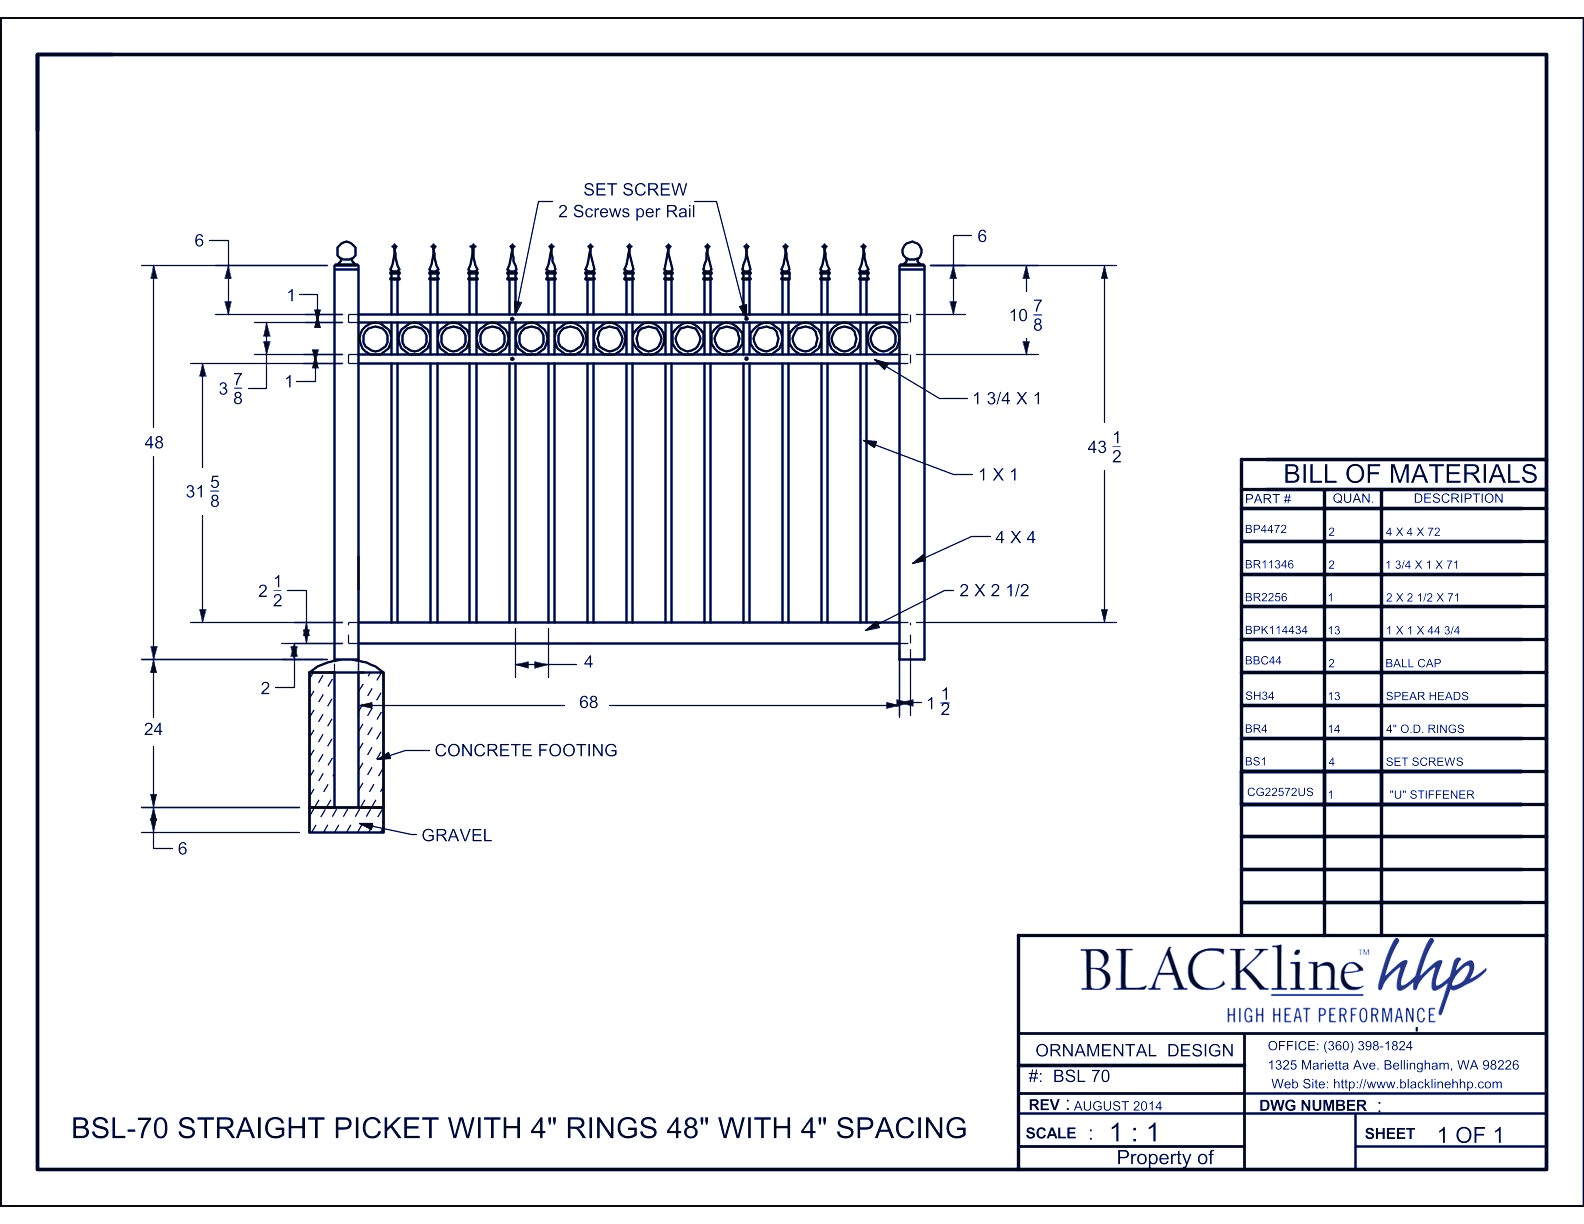 BSL-70: Straight Picket with 4" Rings 48" with 4" Spacing